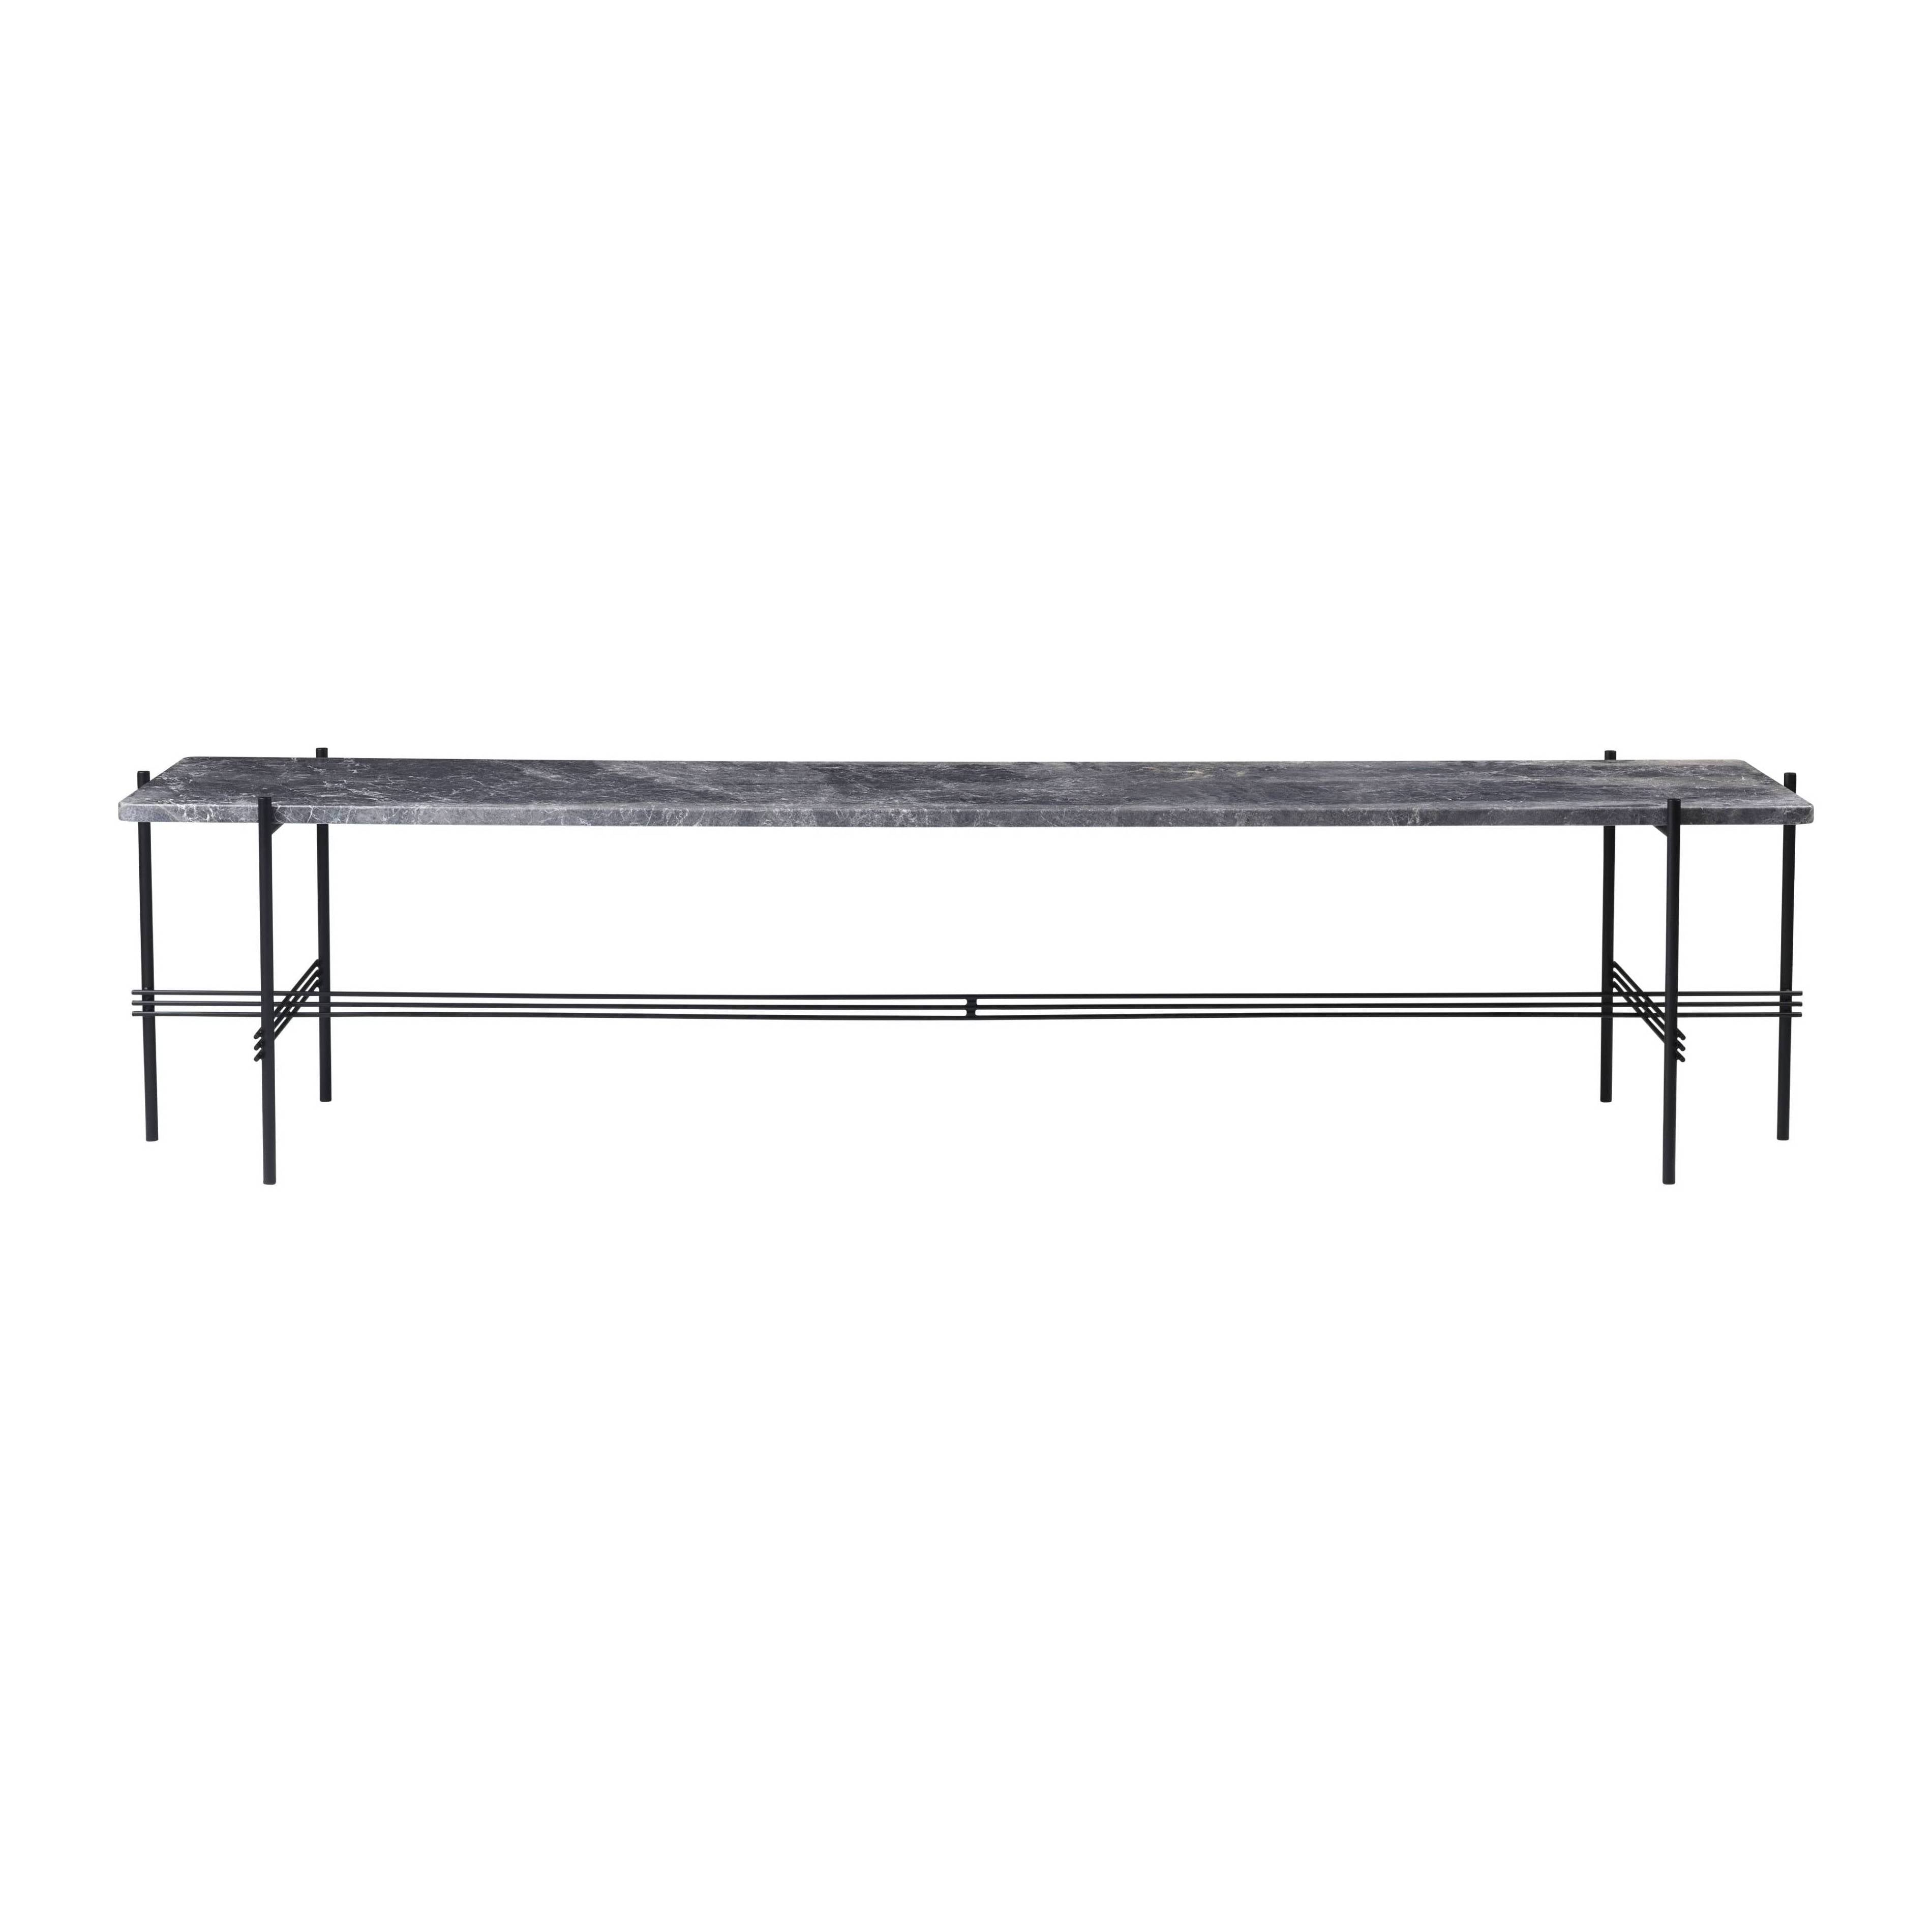 TS Console: 1 Rack + Large - 70.9